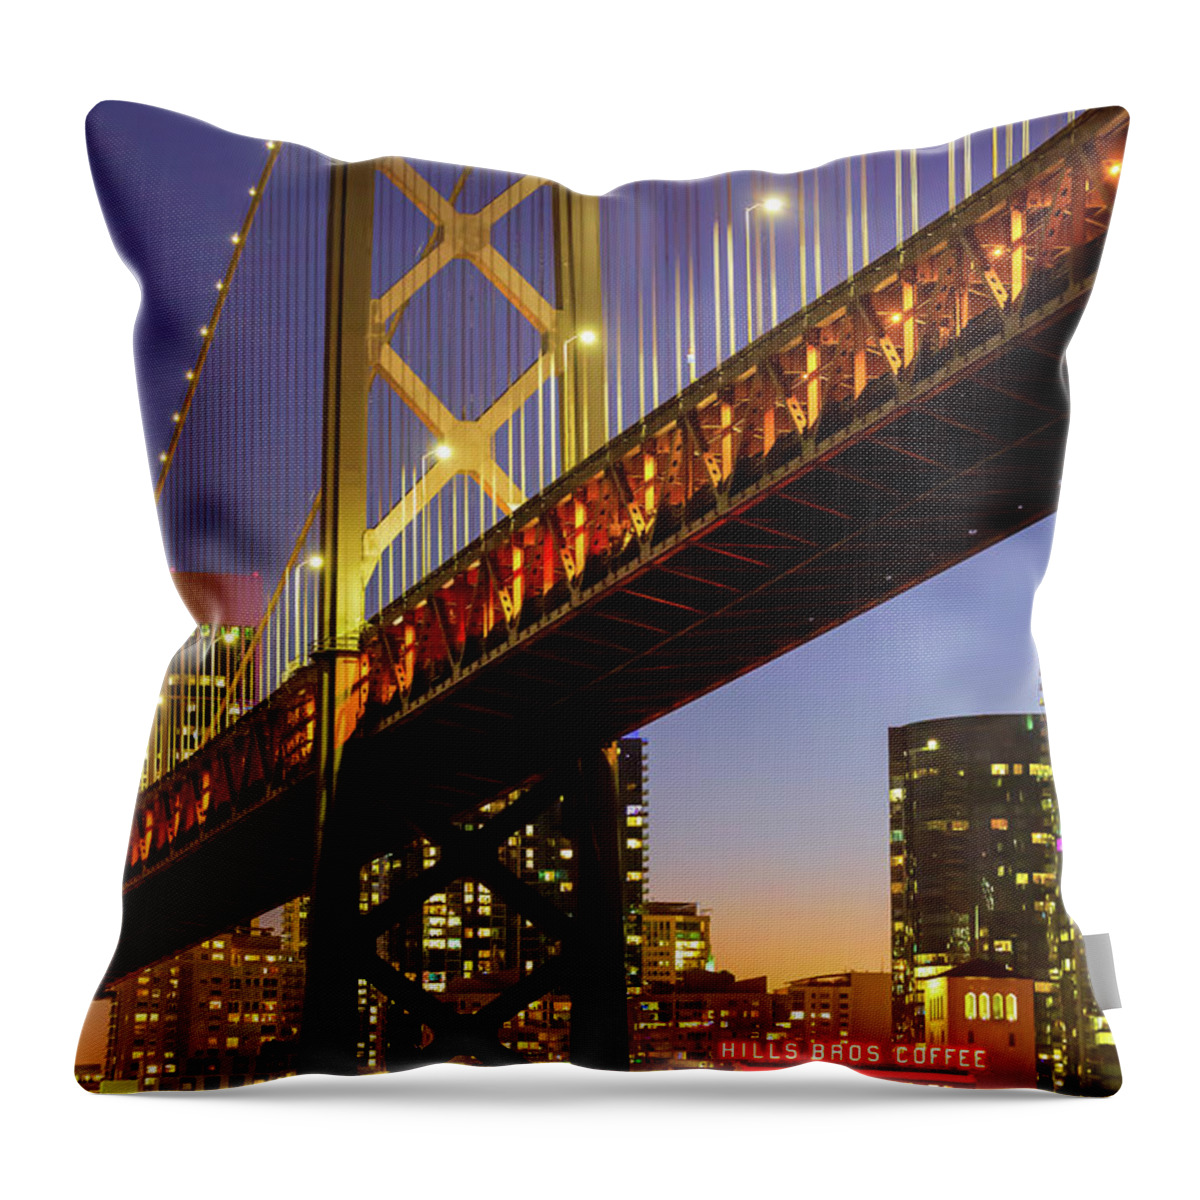 Sfo Throw Pillow featuring the photograph Crescent Moon And Coffee Under The Oakland Bay Bridge by Doug Sturgess